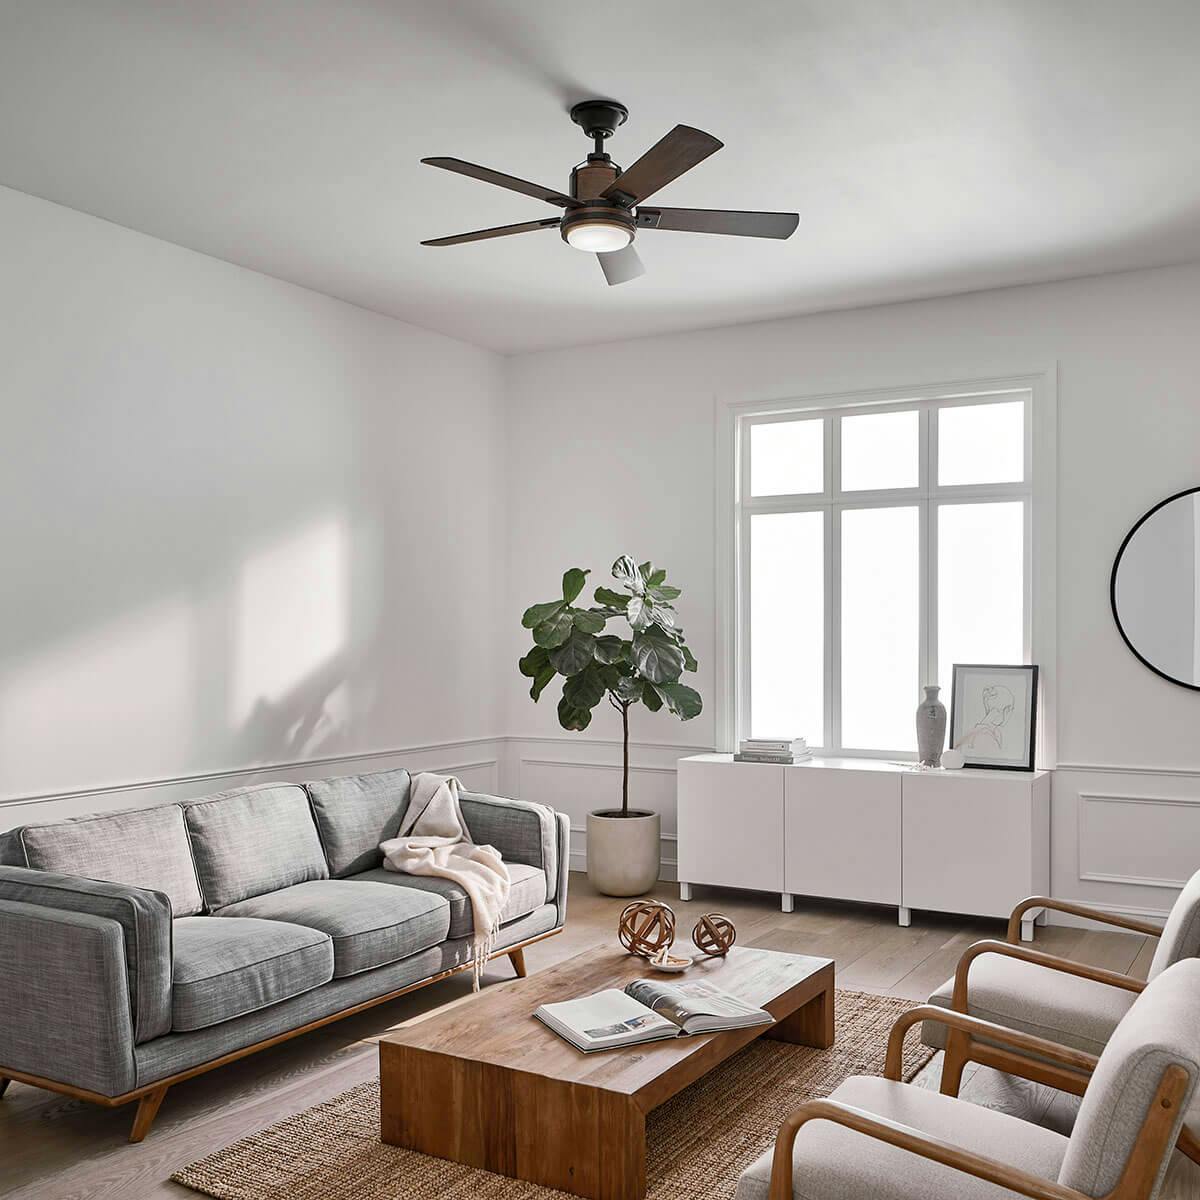 Day time living room image featuring Colerne ceiling fan 300052DBK